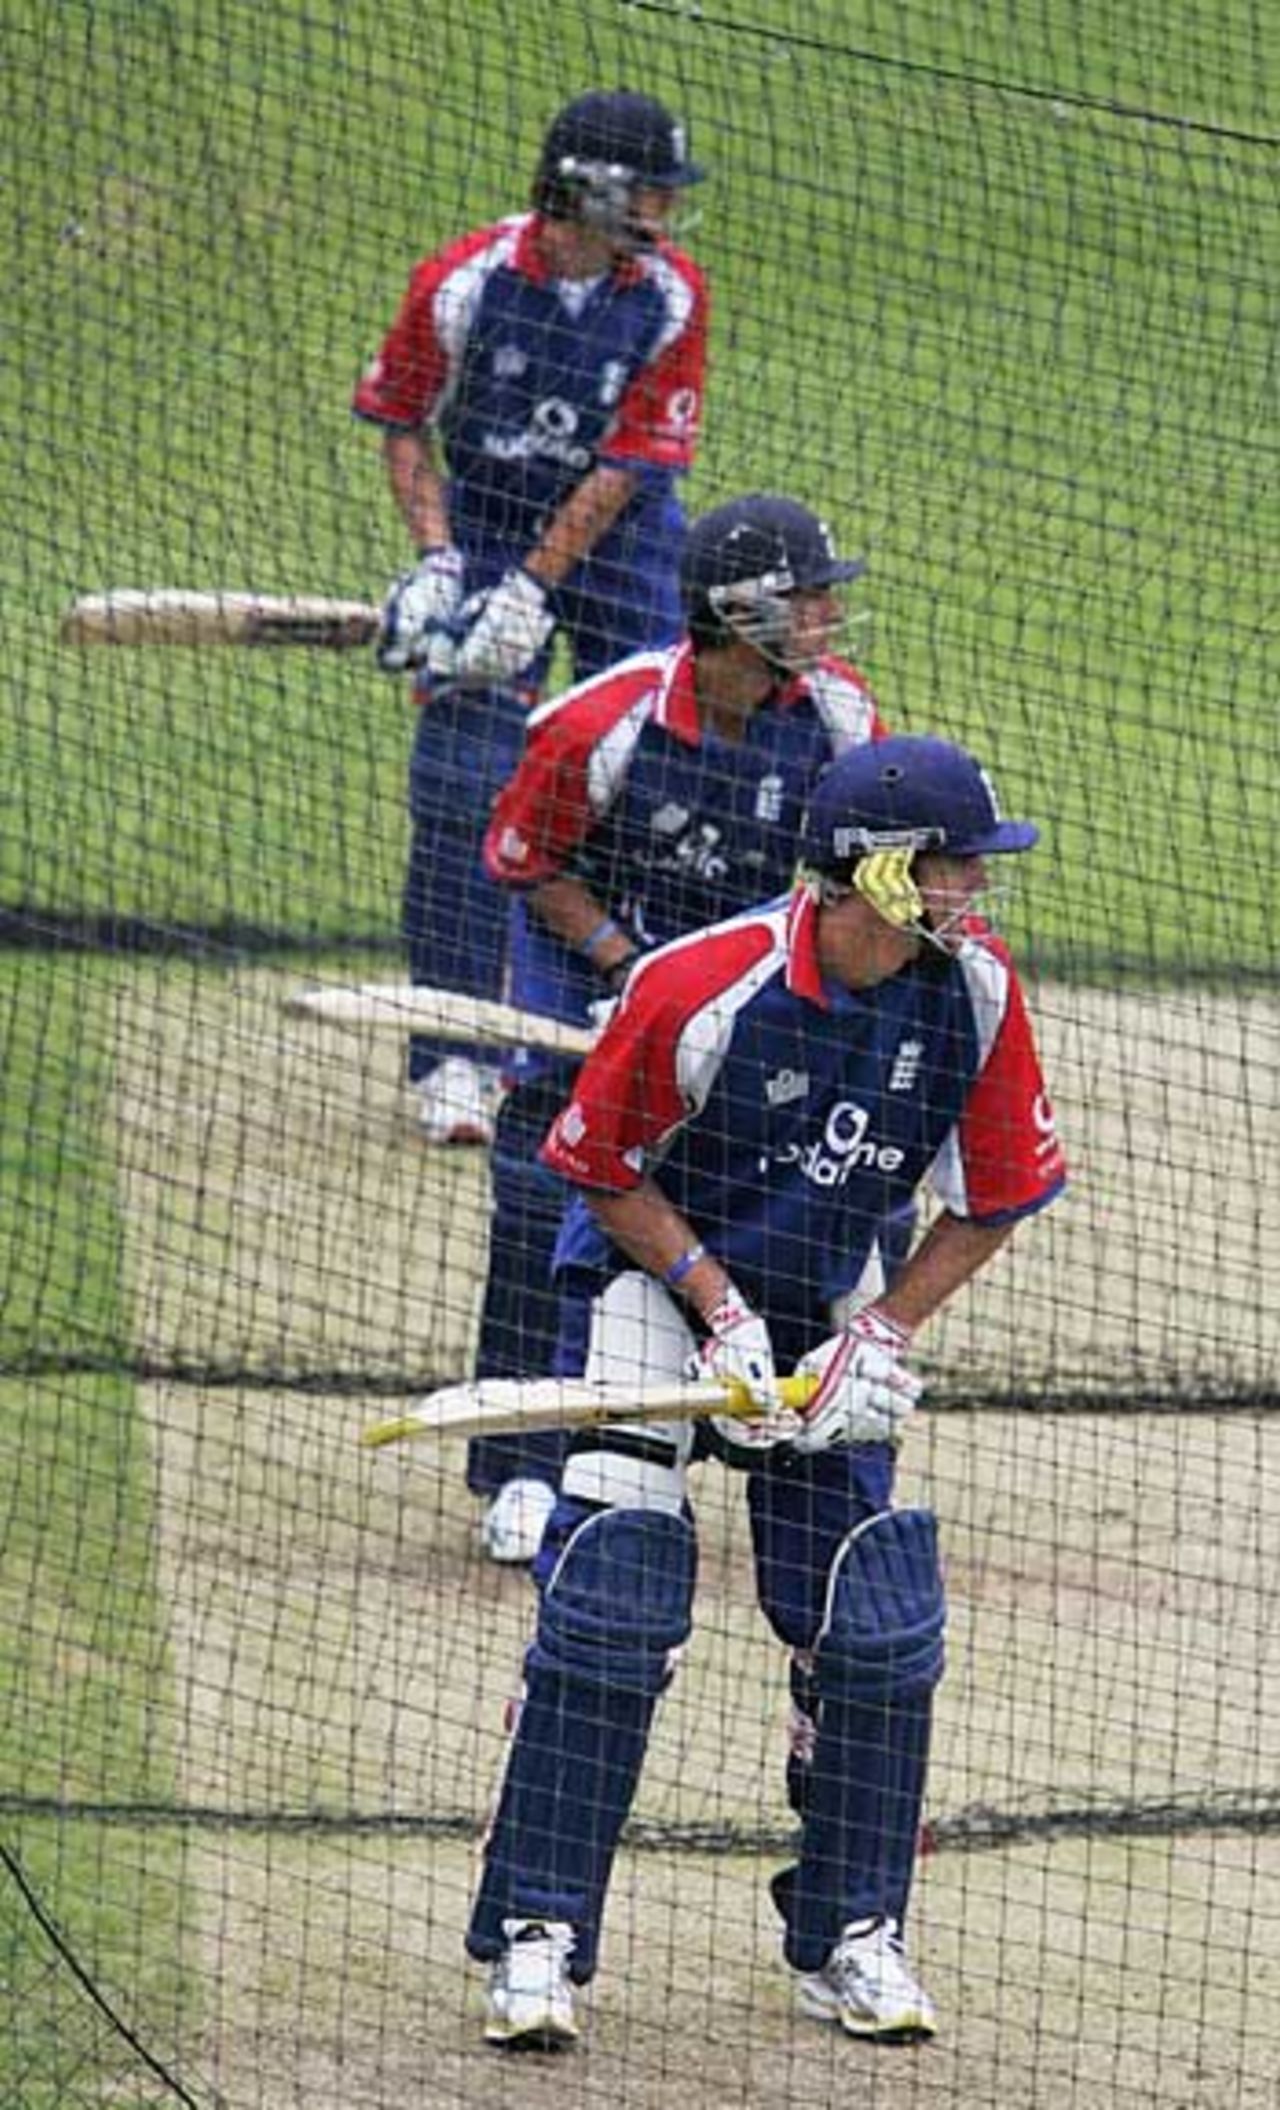 Kevin Pietersen, Vikram Solanki and Jon Lewis in the nets during England's practice session at Headingley, June 25